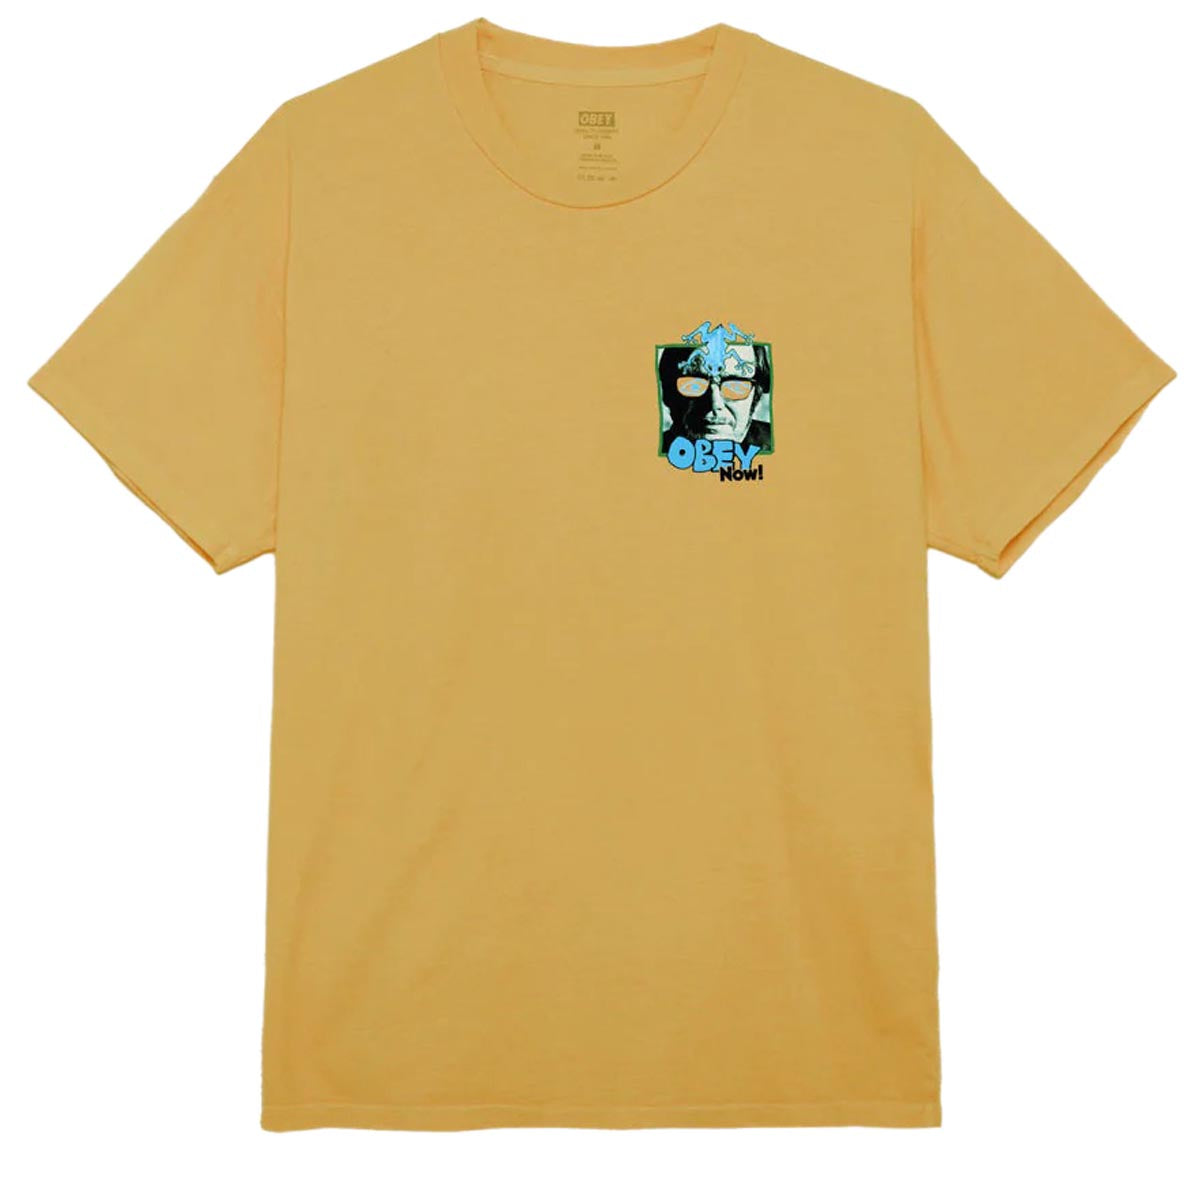 Obey Now! T-Shirt - Pigment Sunflower image 2